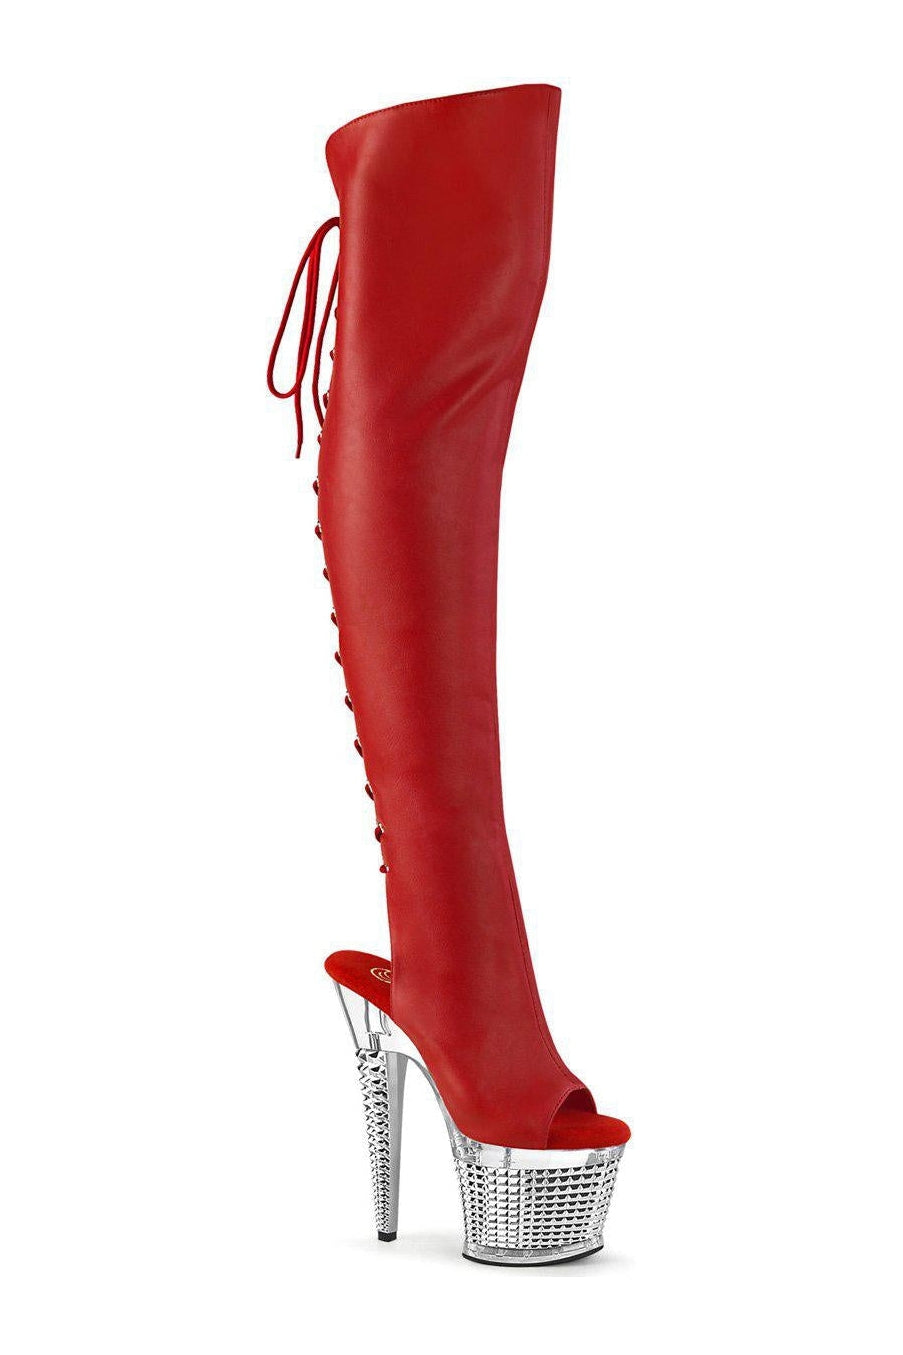 SPECTATOR-3019 Thigh Boot | Red Faux Leather-Thigh Boots-Pleaser-Red-7-Faux Leather-SEXYSHOES.COM